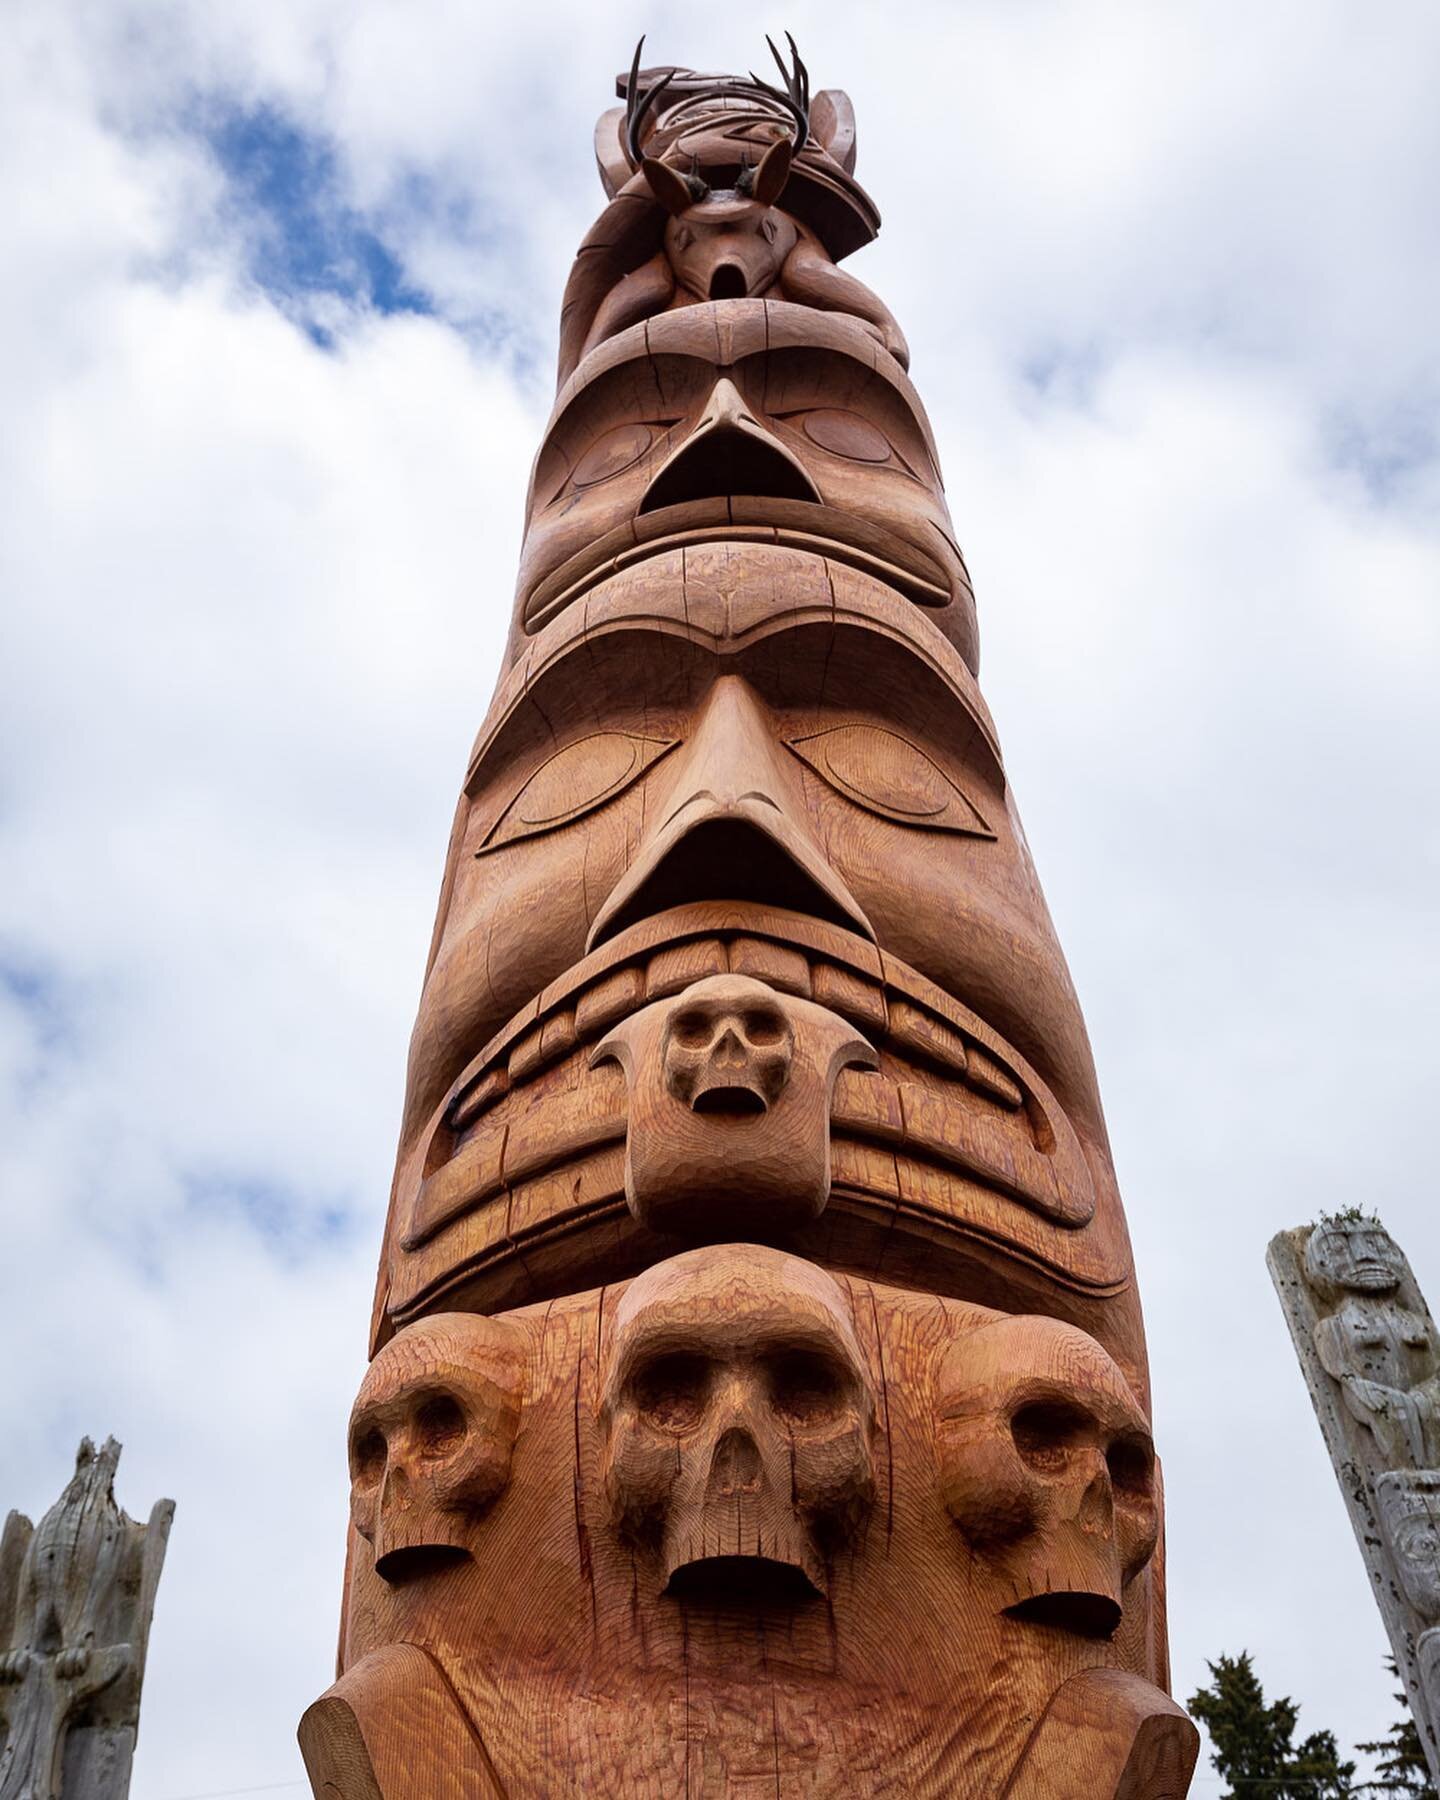 Last summer, members of the House of Ewos from the Tla-o-qui-aht Nation, along with many invited guests, raised a totem pole at the ancient village of Opitsaht on Meares Island for the first time since 1993. Prior to colonization, each house in the v